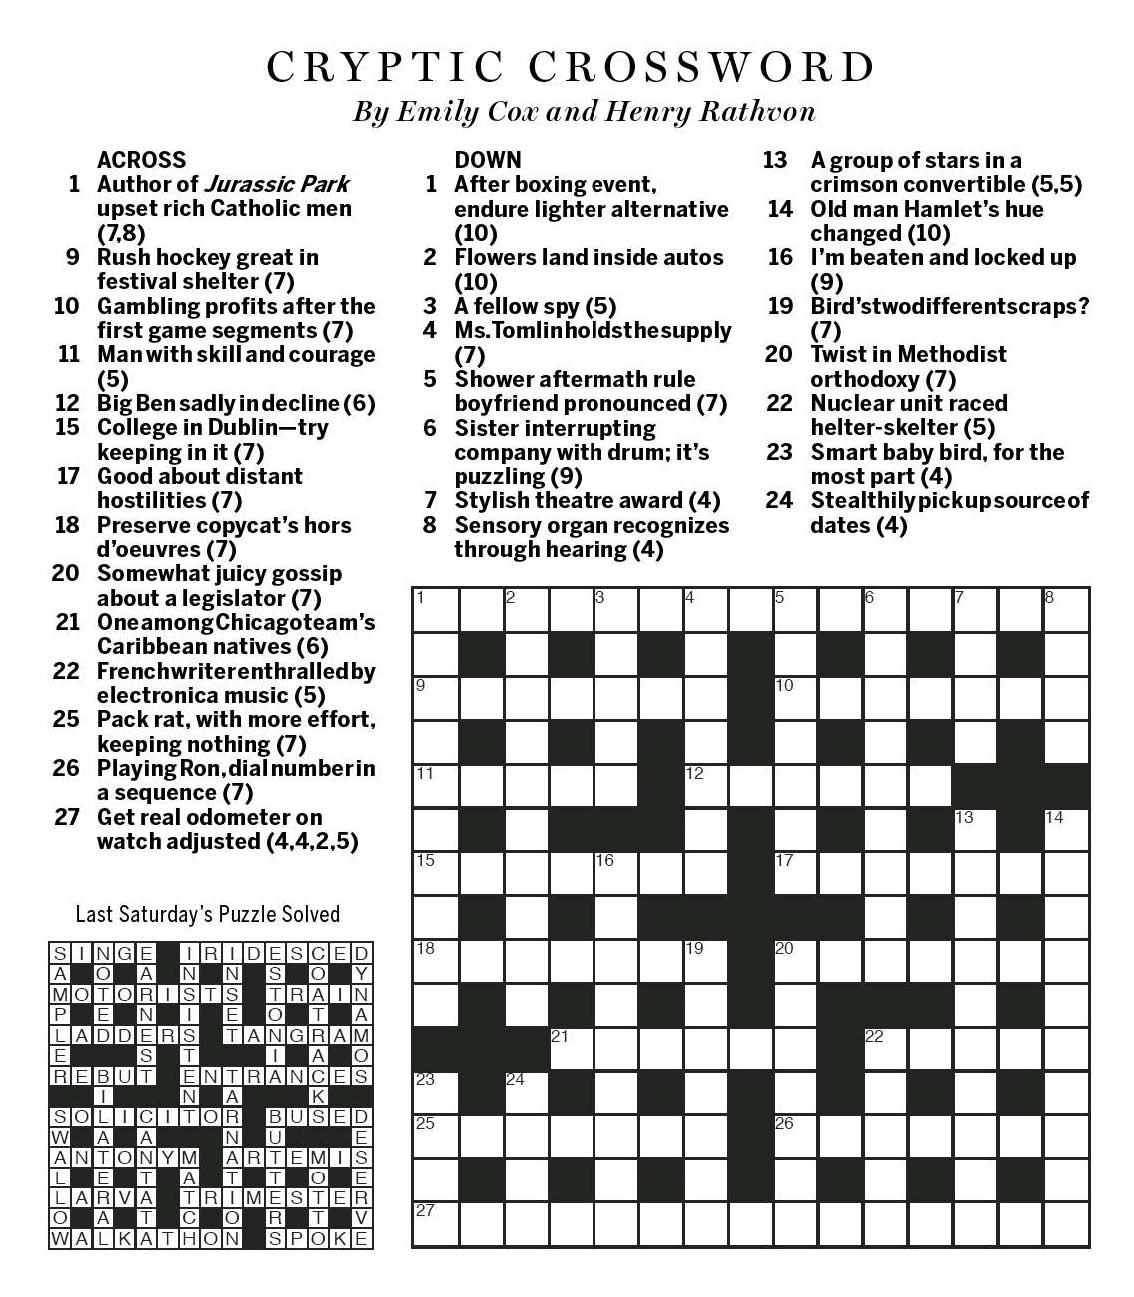 National Post Cryptic Crossword Forum: Saturday, March 12, 2016